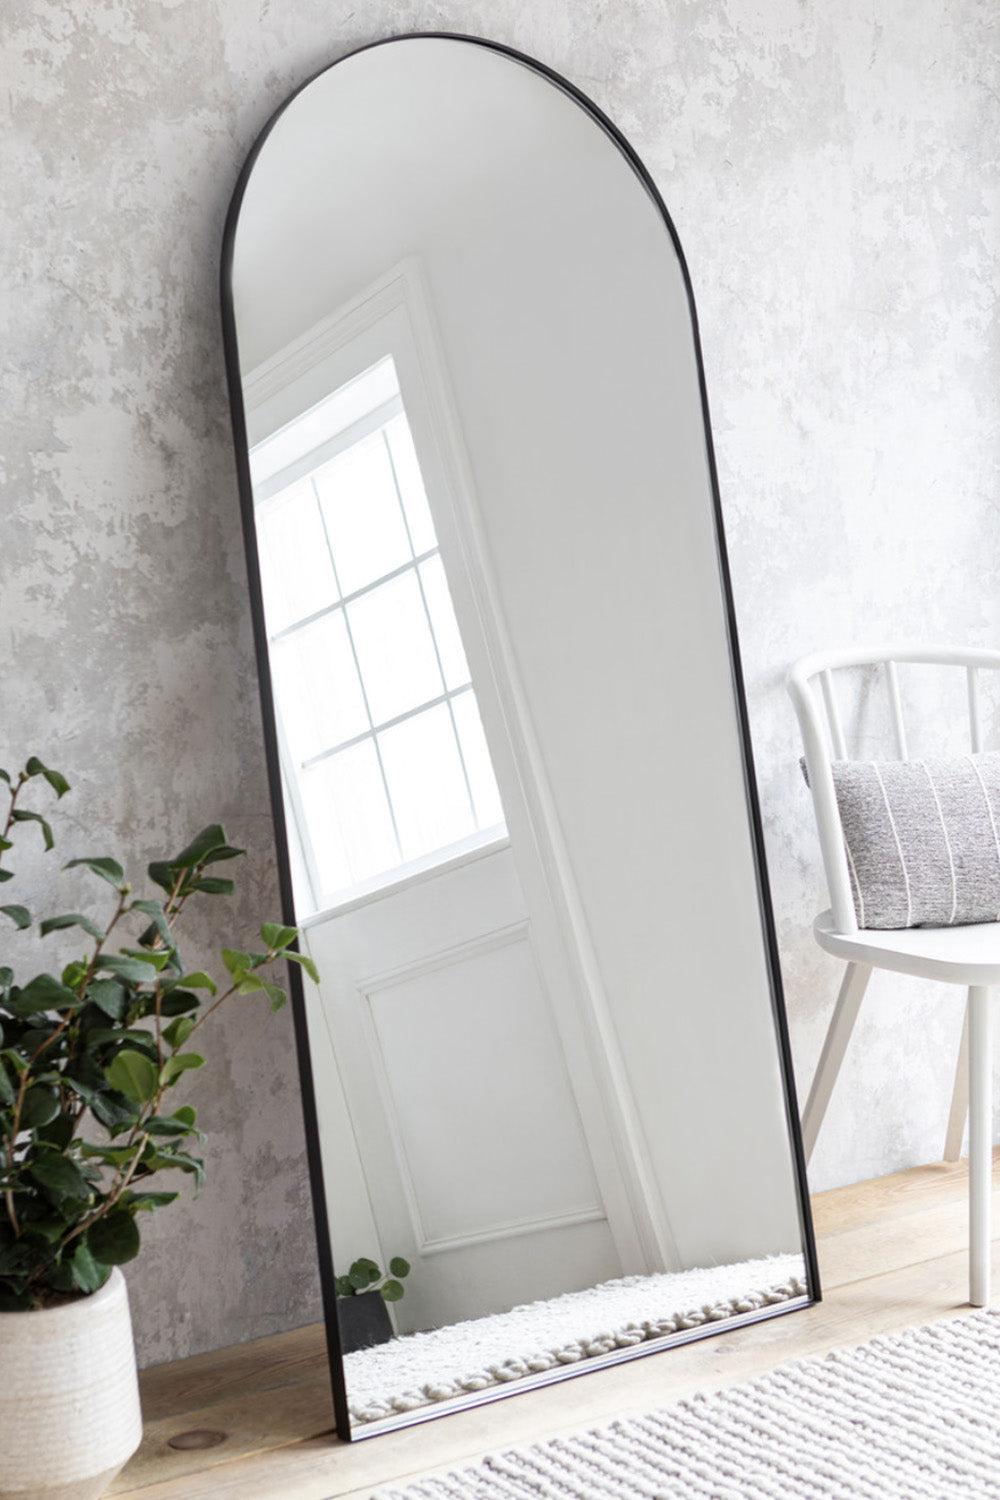 Arched Iron Leaning Mirror